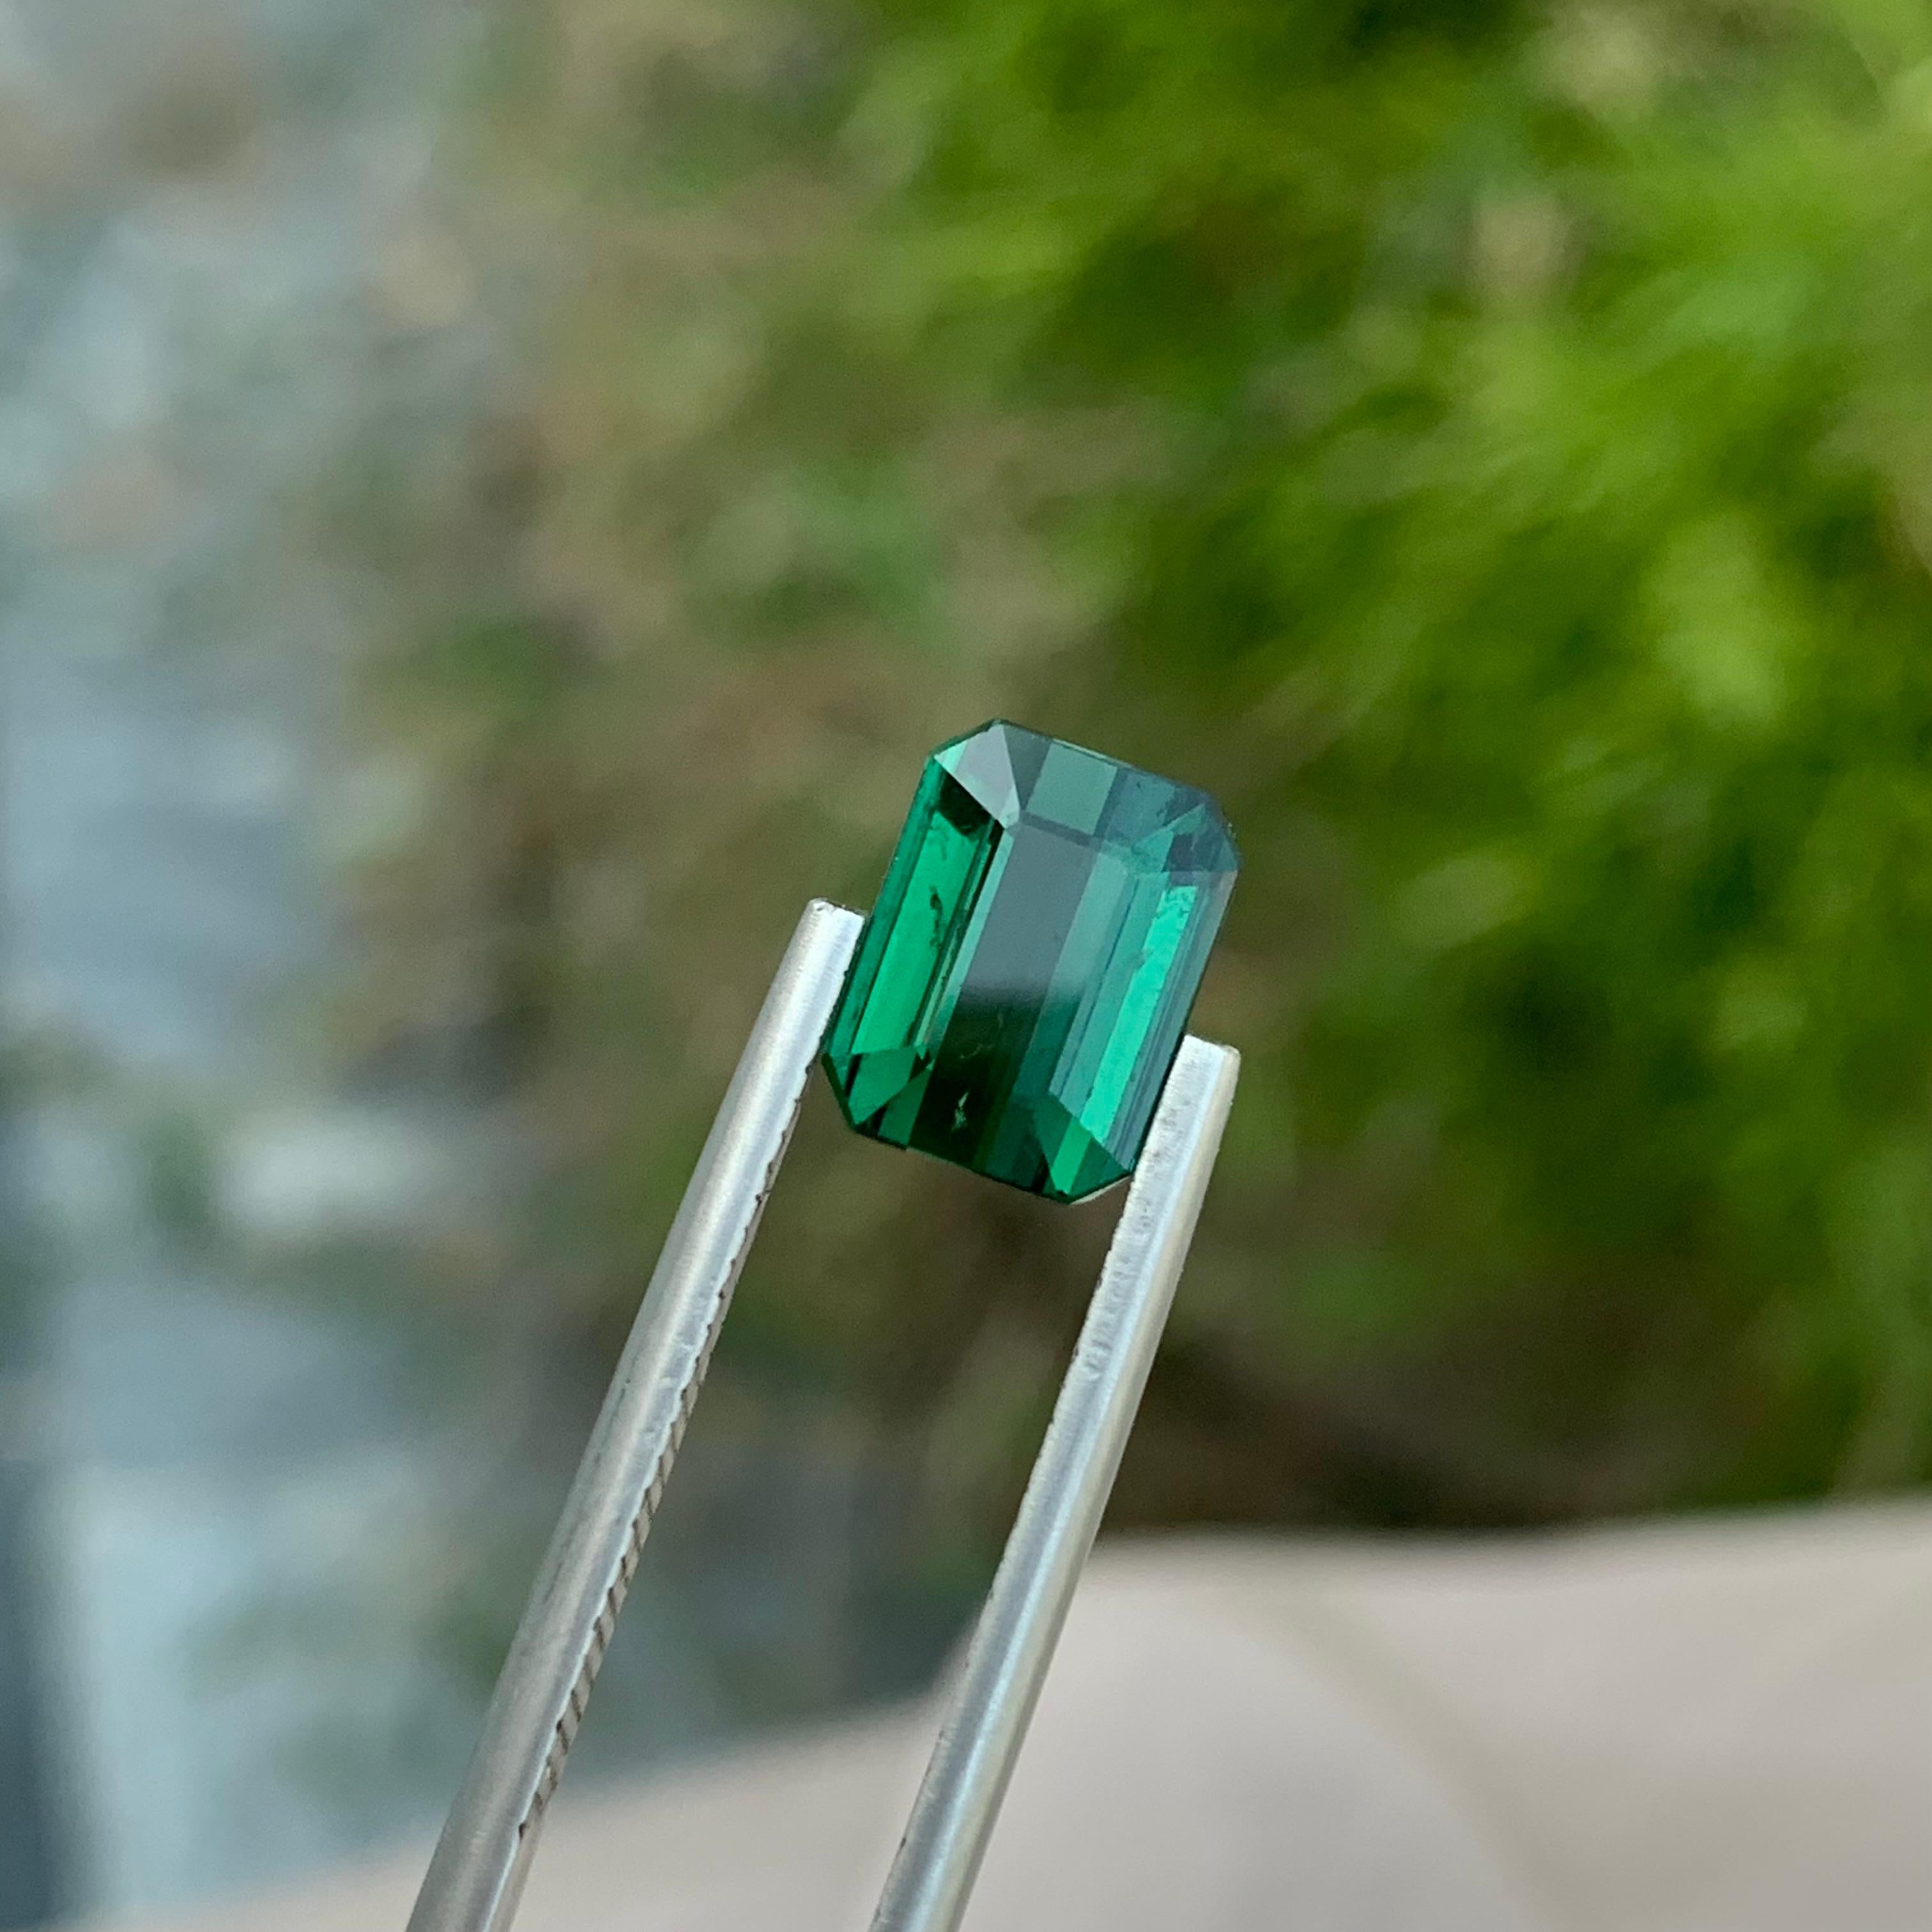 Loose Green Tourmaline 

Weight: 2.85 Carats
Dimension: 9.4 x 7.2 x 4.4 Mm
Colour: Green
Origin: Afghanistan
Certificate: On Demand
Treatment: Non

Tourmaline is a captivating gemstone known for its remarkable variety of colors, making it a favorite